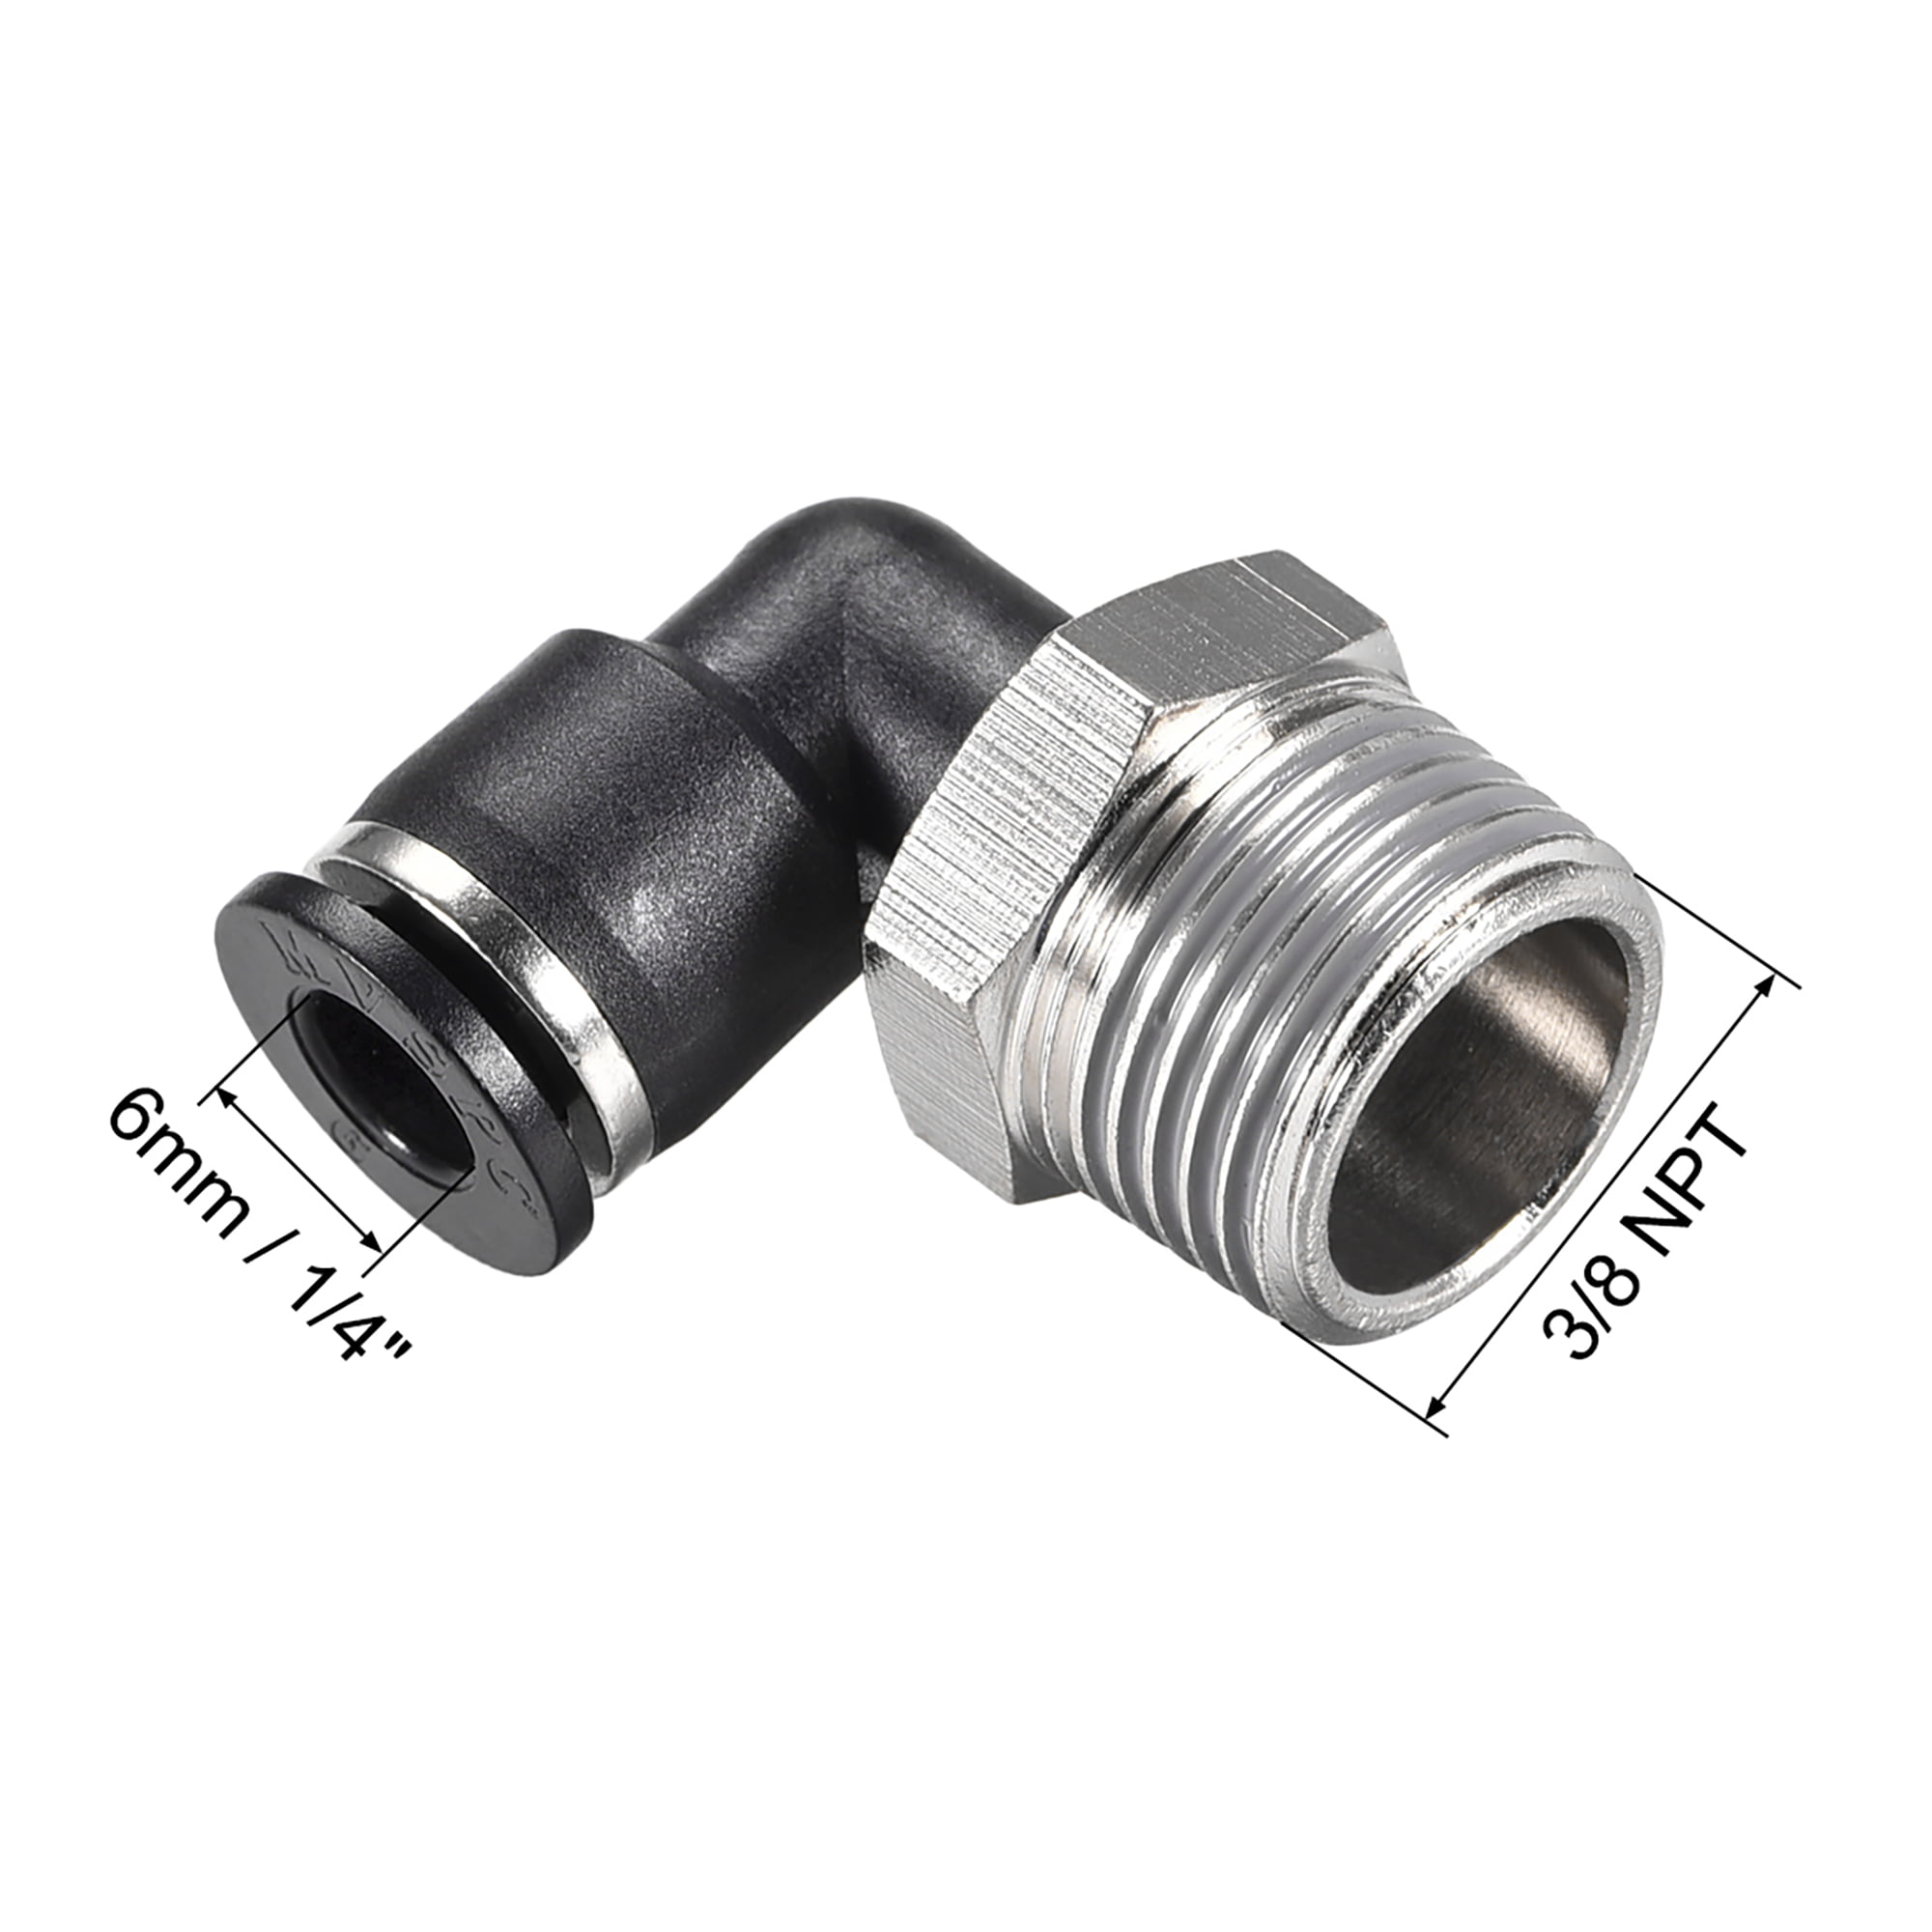 20 pcs Push in Fitting Plug Connector Air Pneumatic For Tube OD 3/8" 